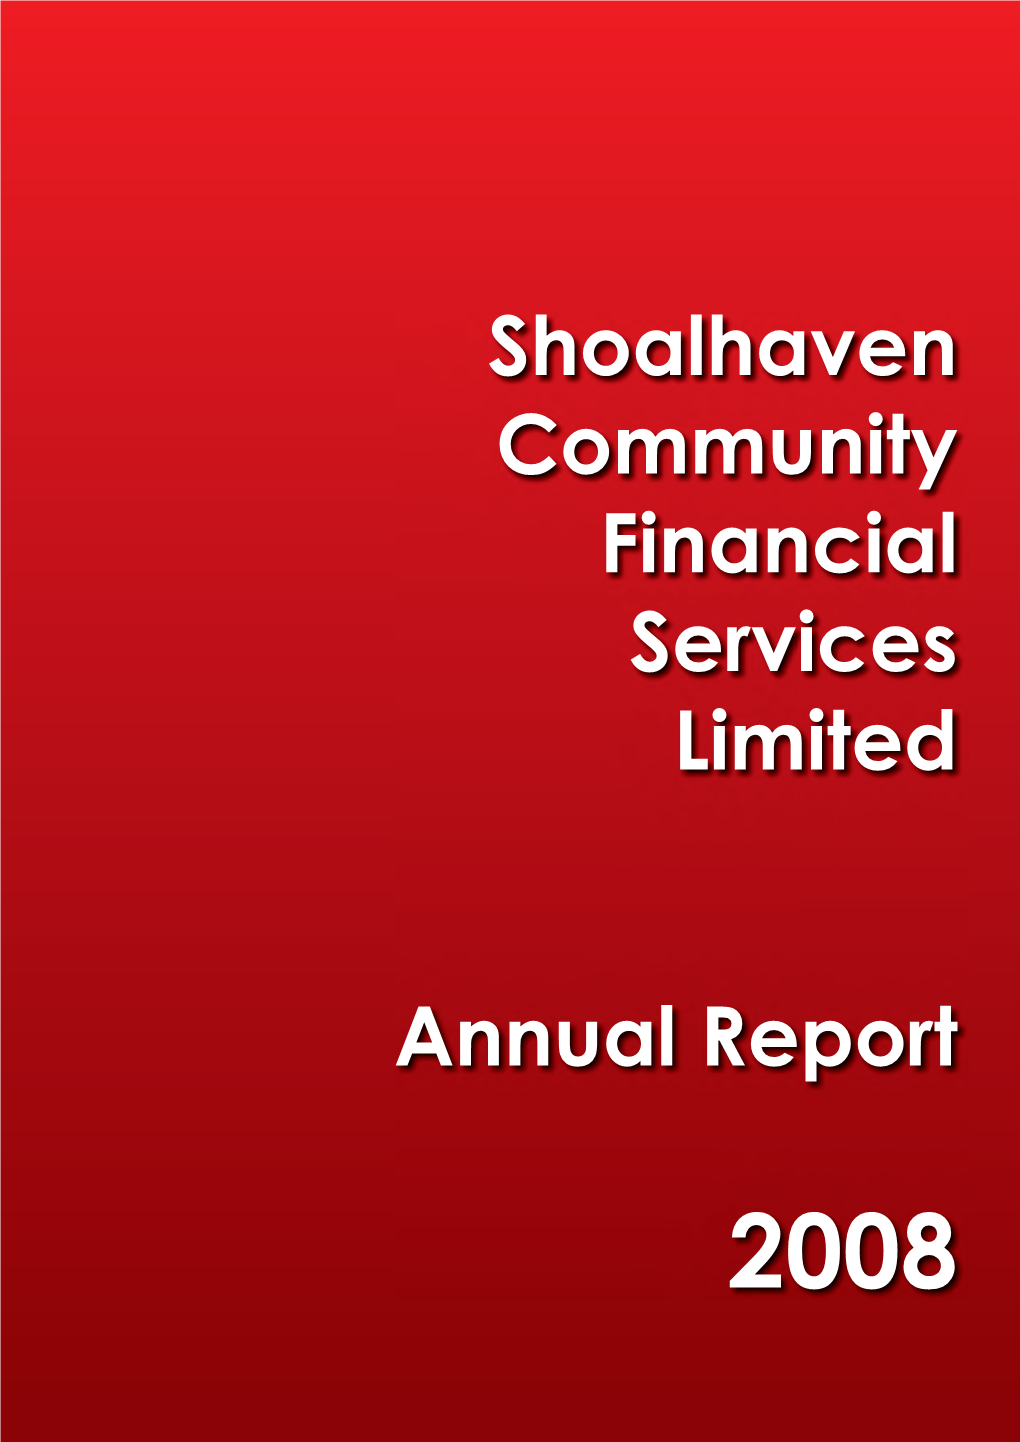 Shoalhaven Community Financial Services Limited Annual Report